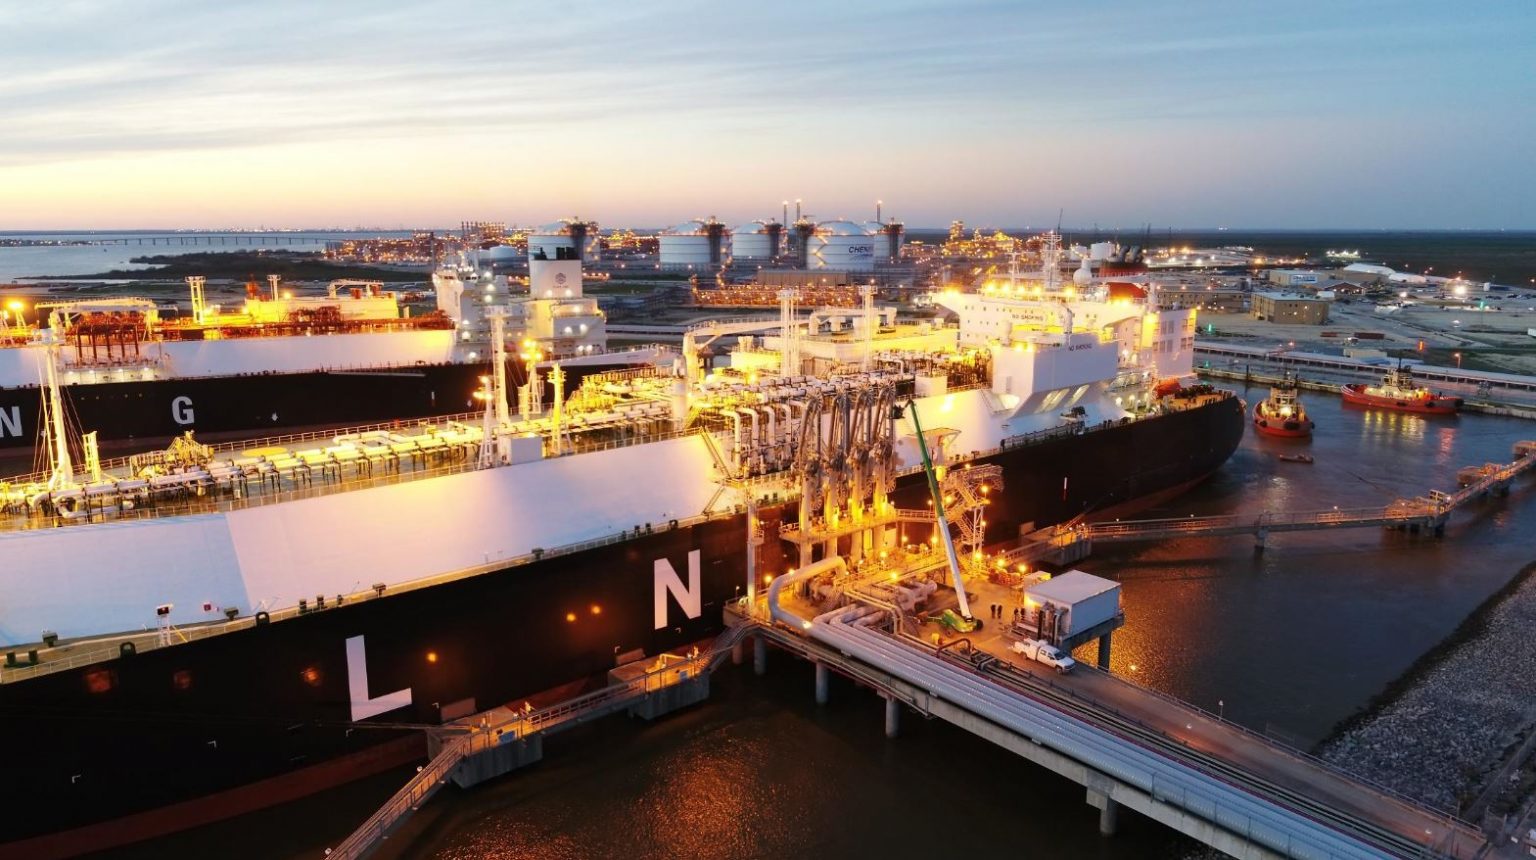 EIA: US weekly LNG exports increase, Henry Hub price follows